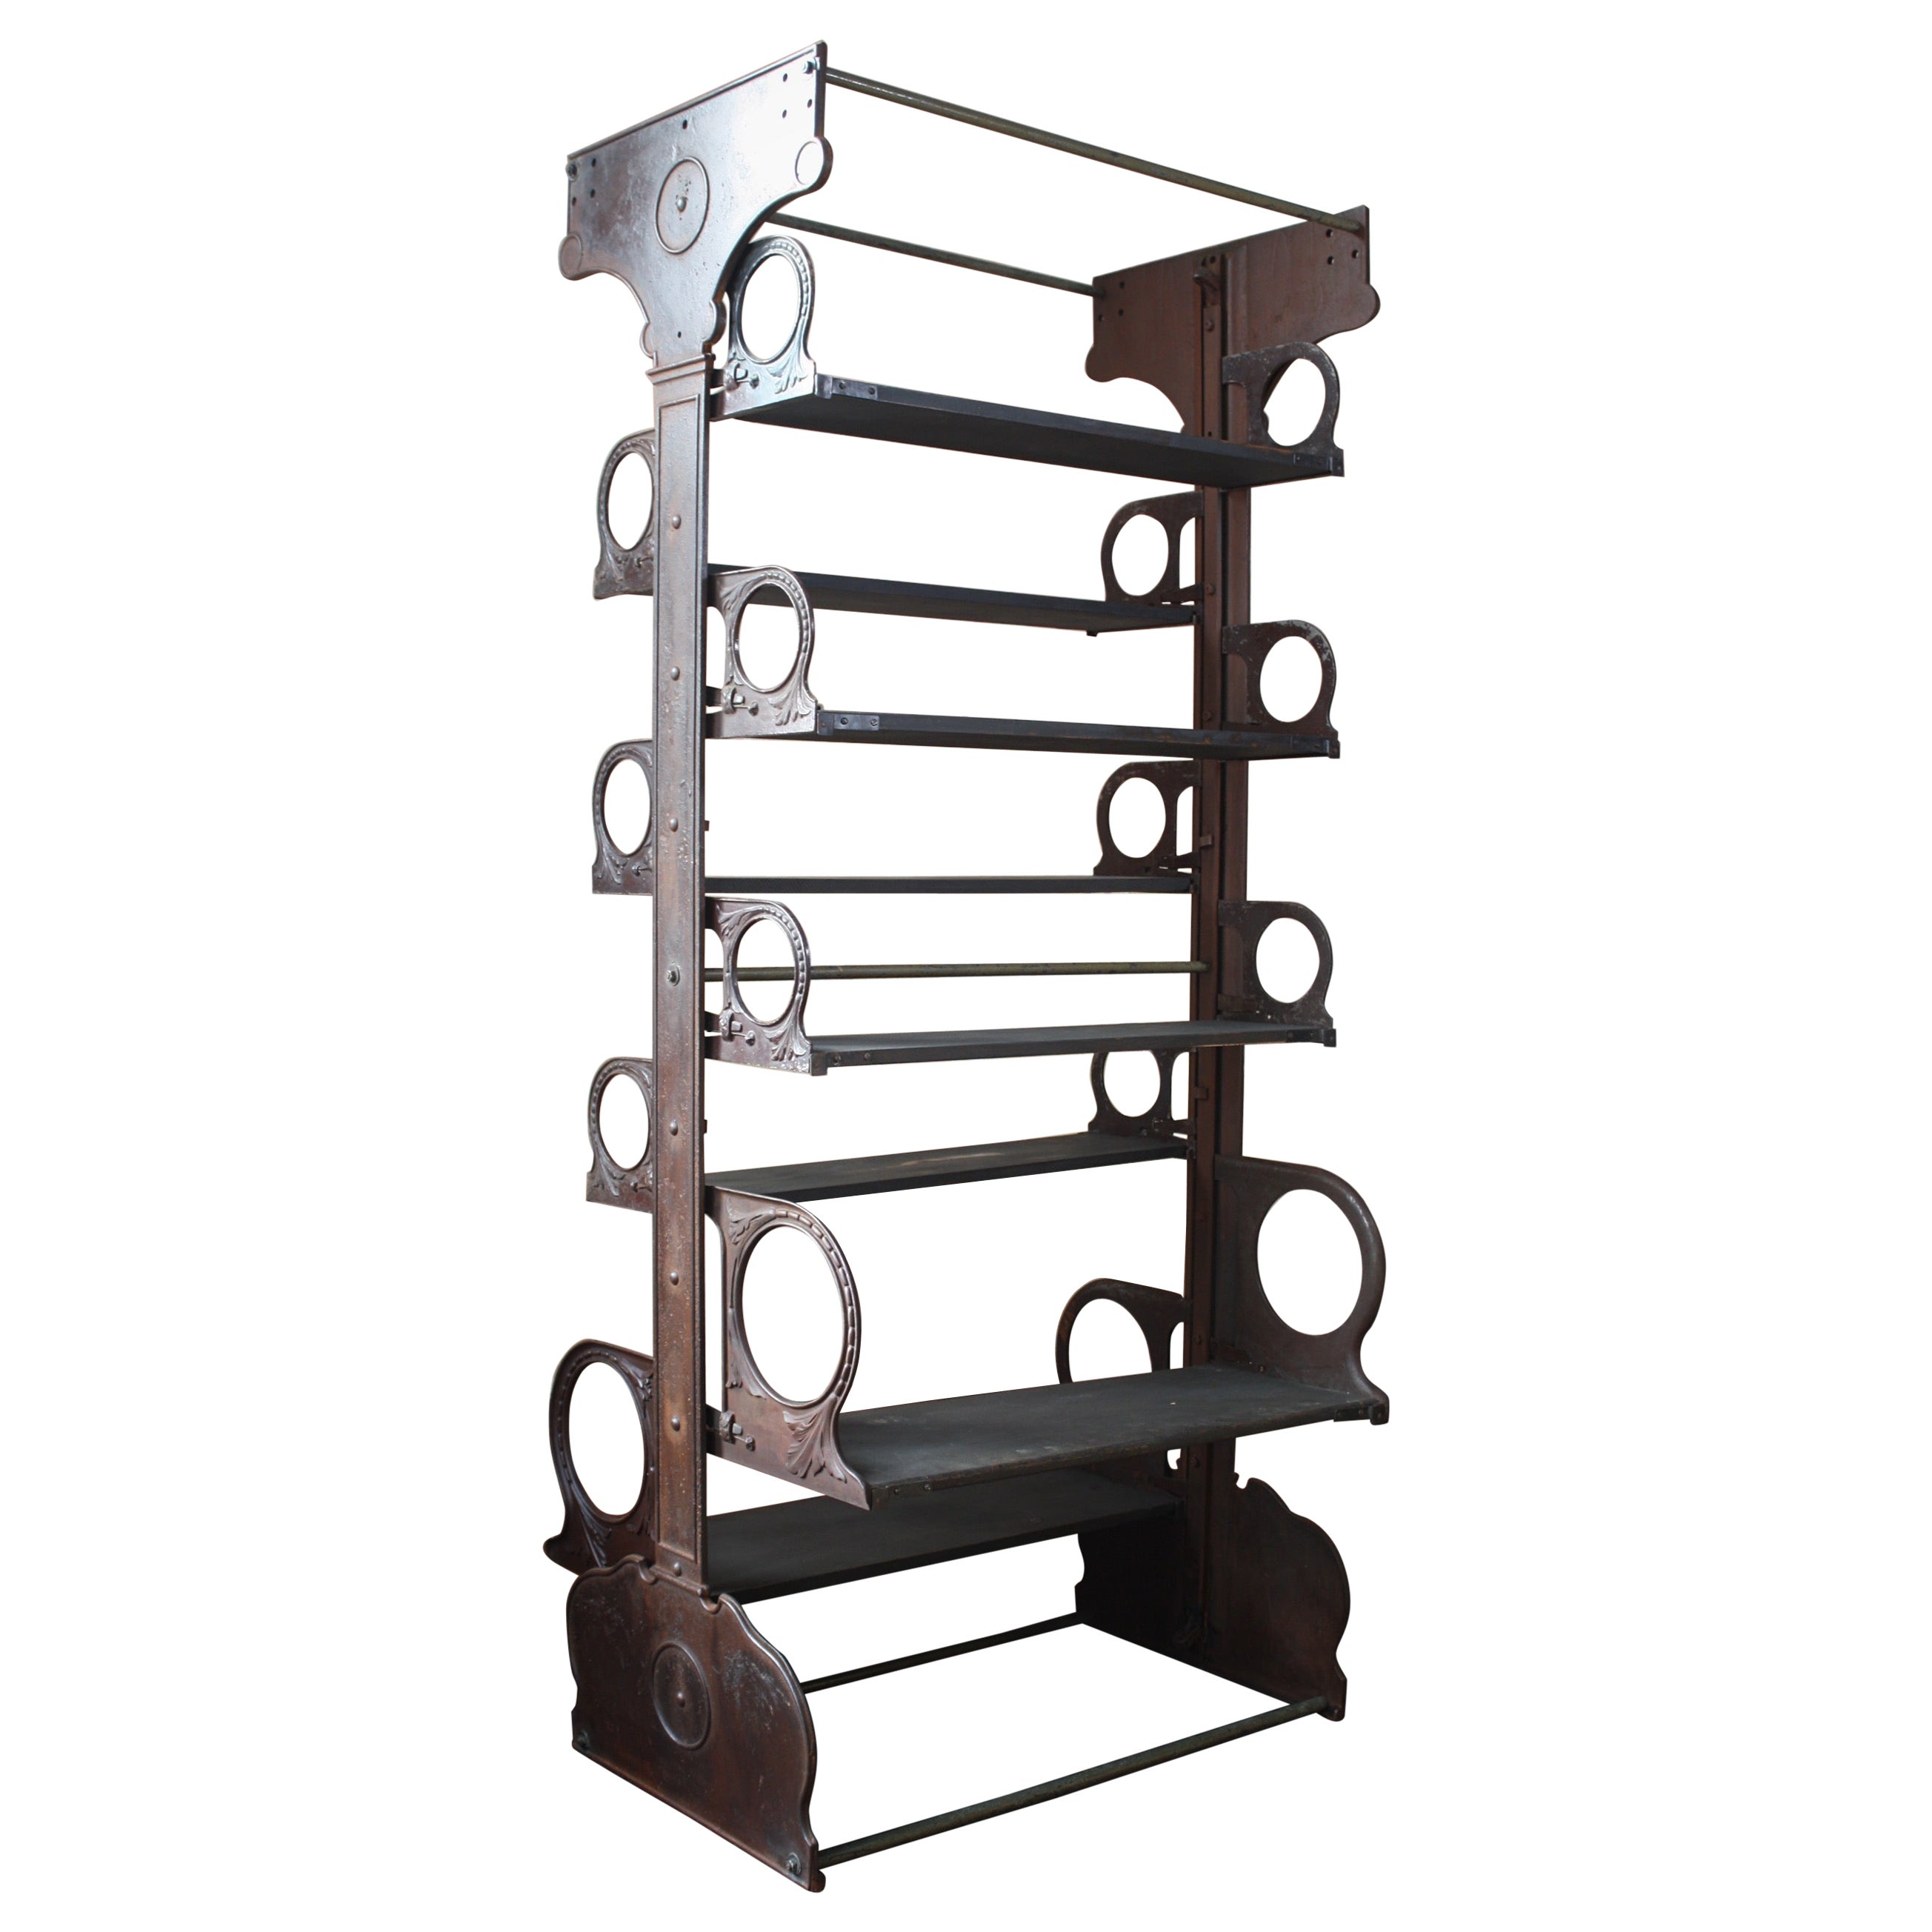 19th C W. Lucy & Co Ltd of Oxford Cast Iron Adjustable Racking Shelving 